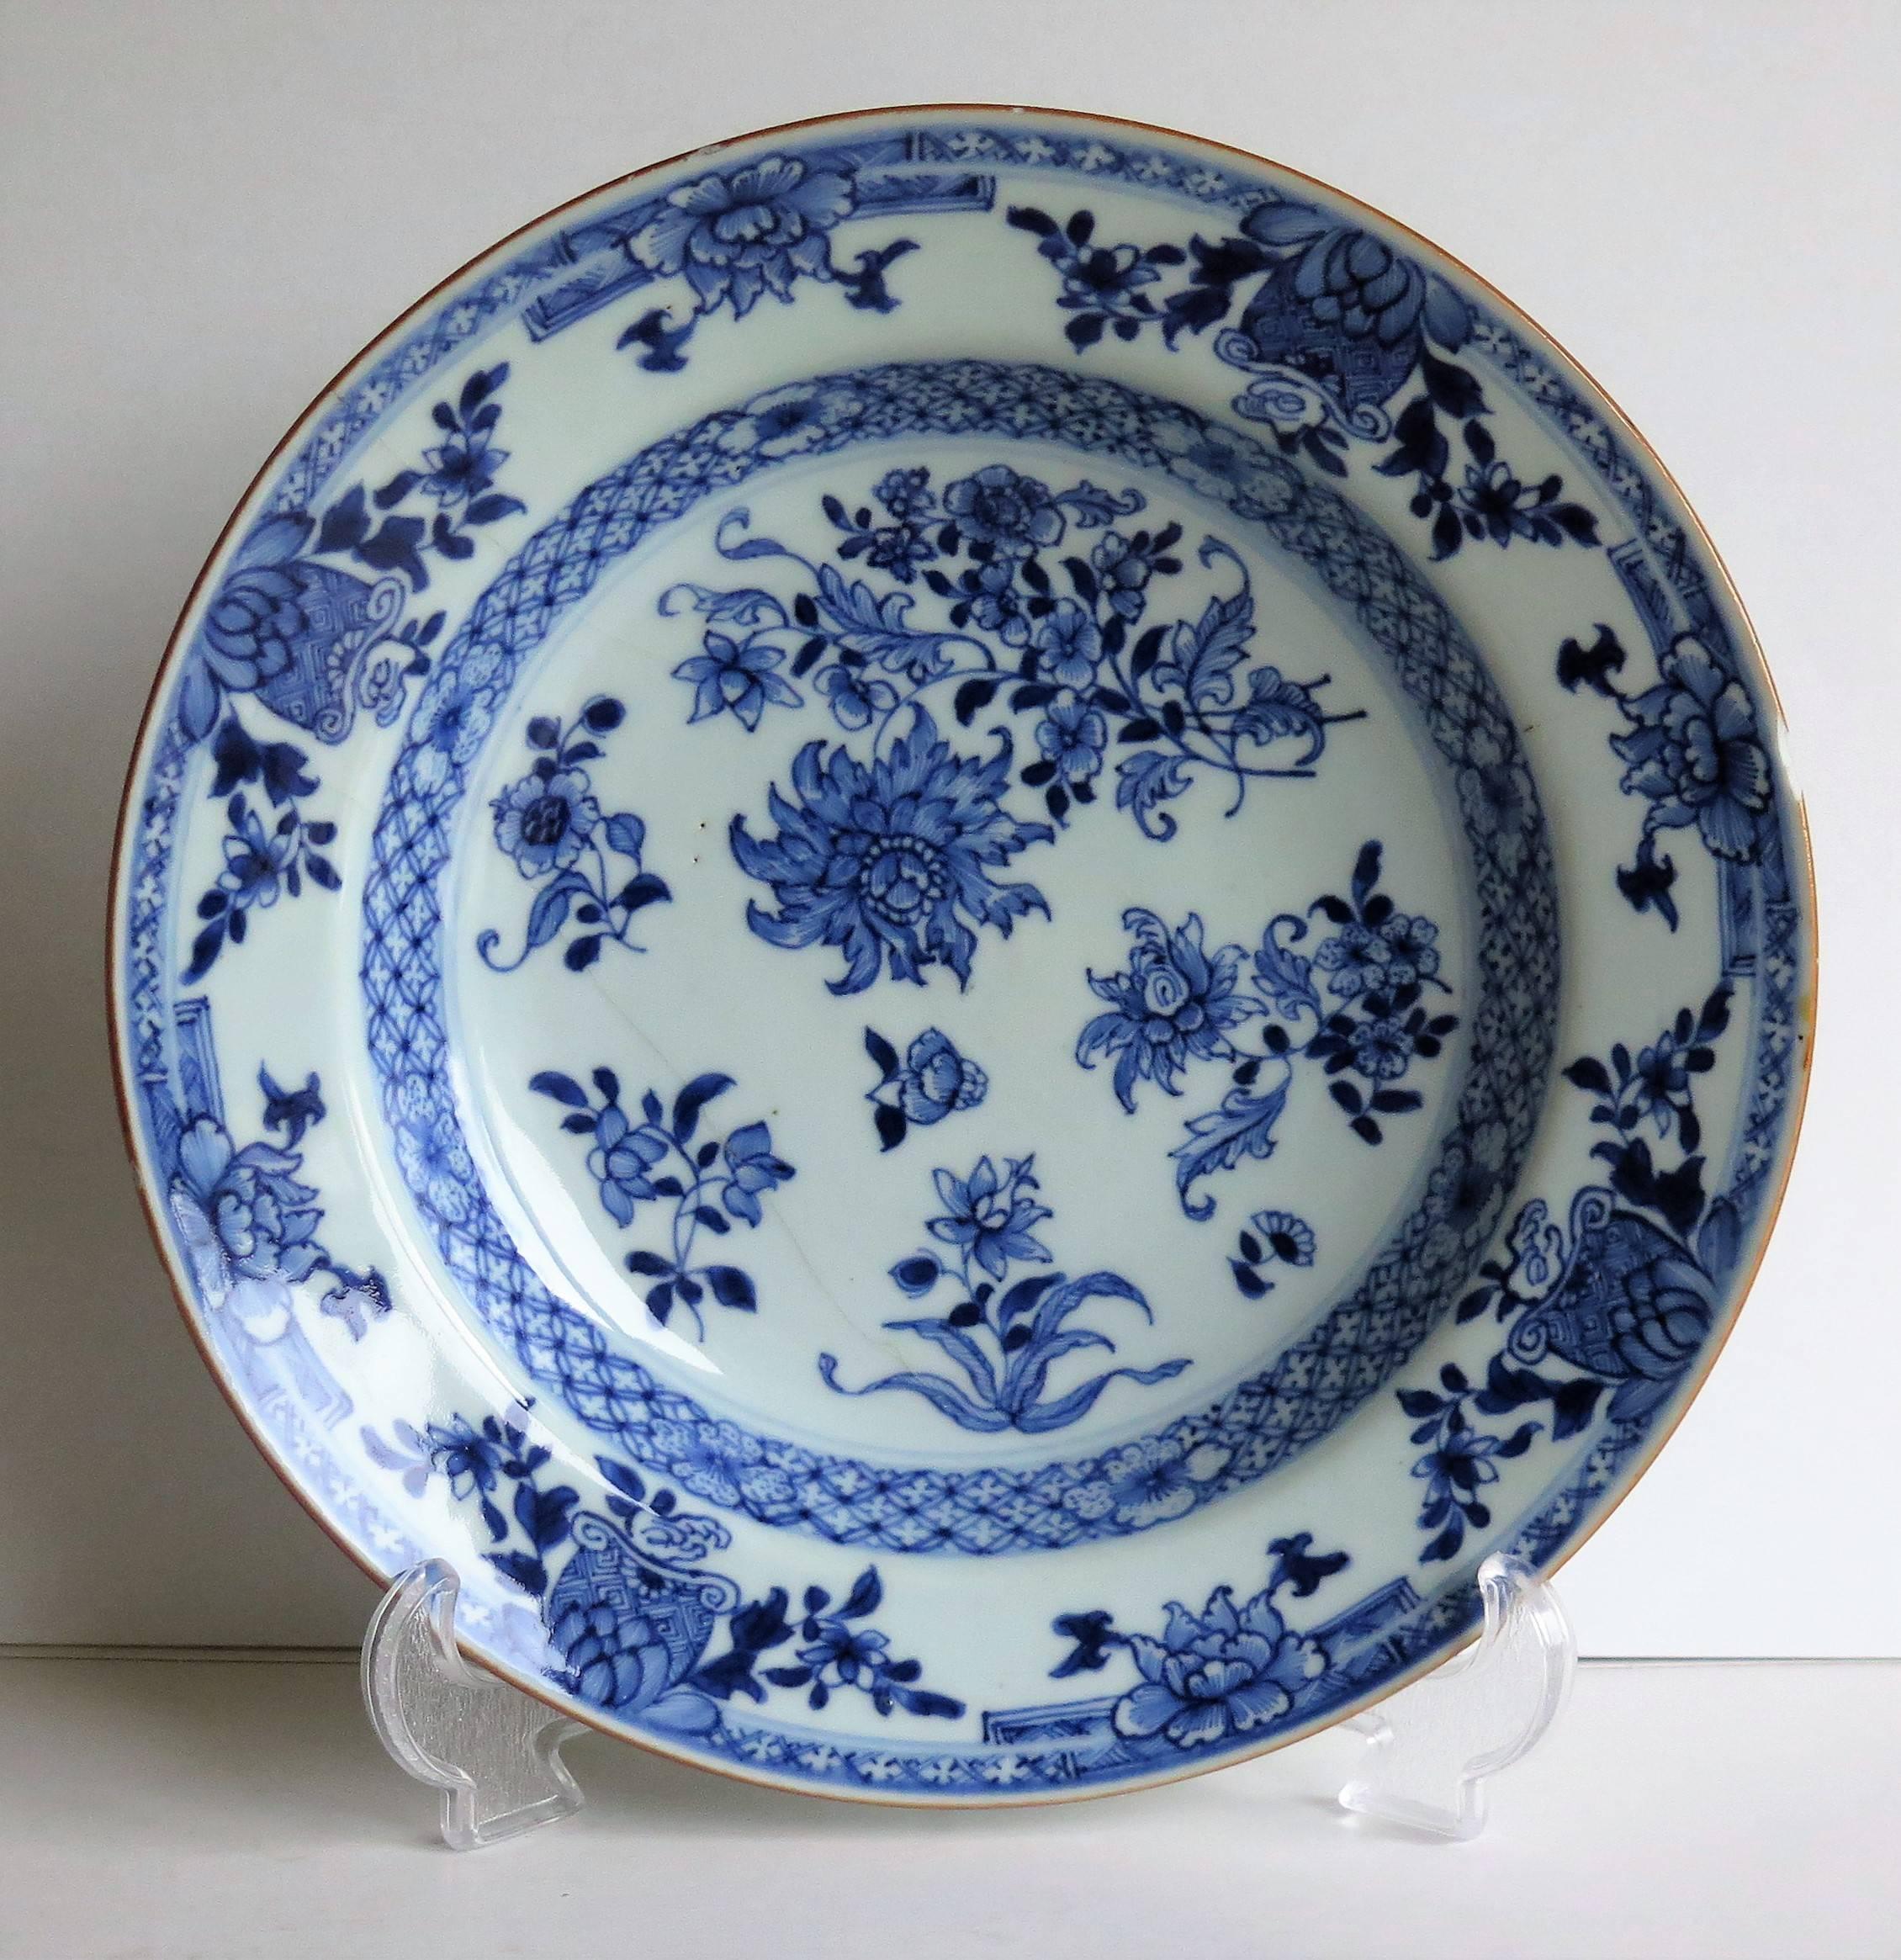 Qing Chinese Porcelain Plate or Bowl, Blue and White, Floral Sprigs, circa 1770